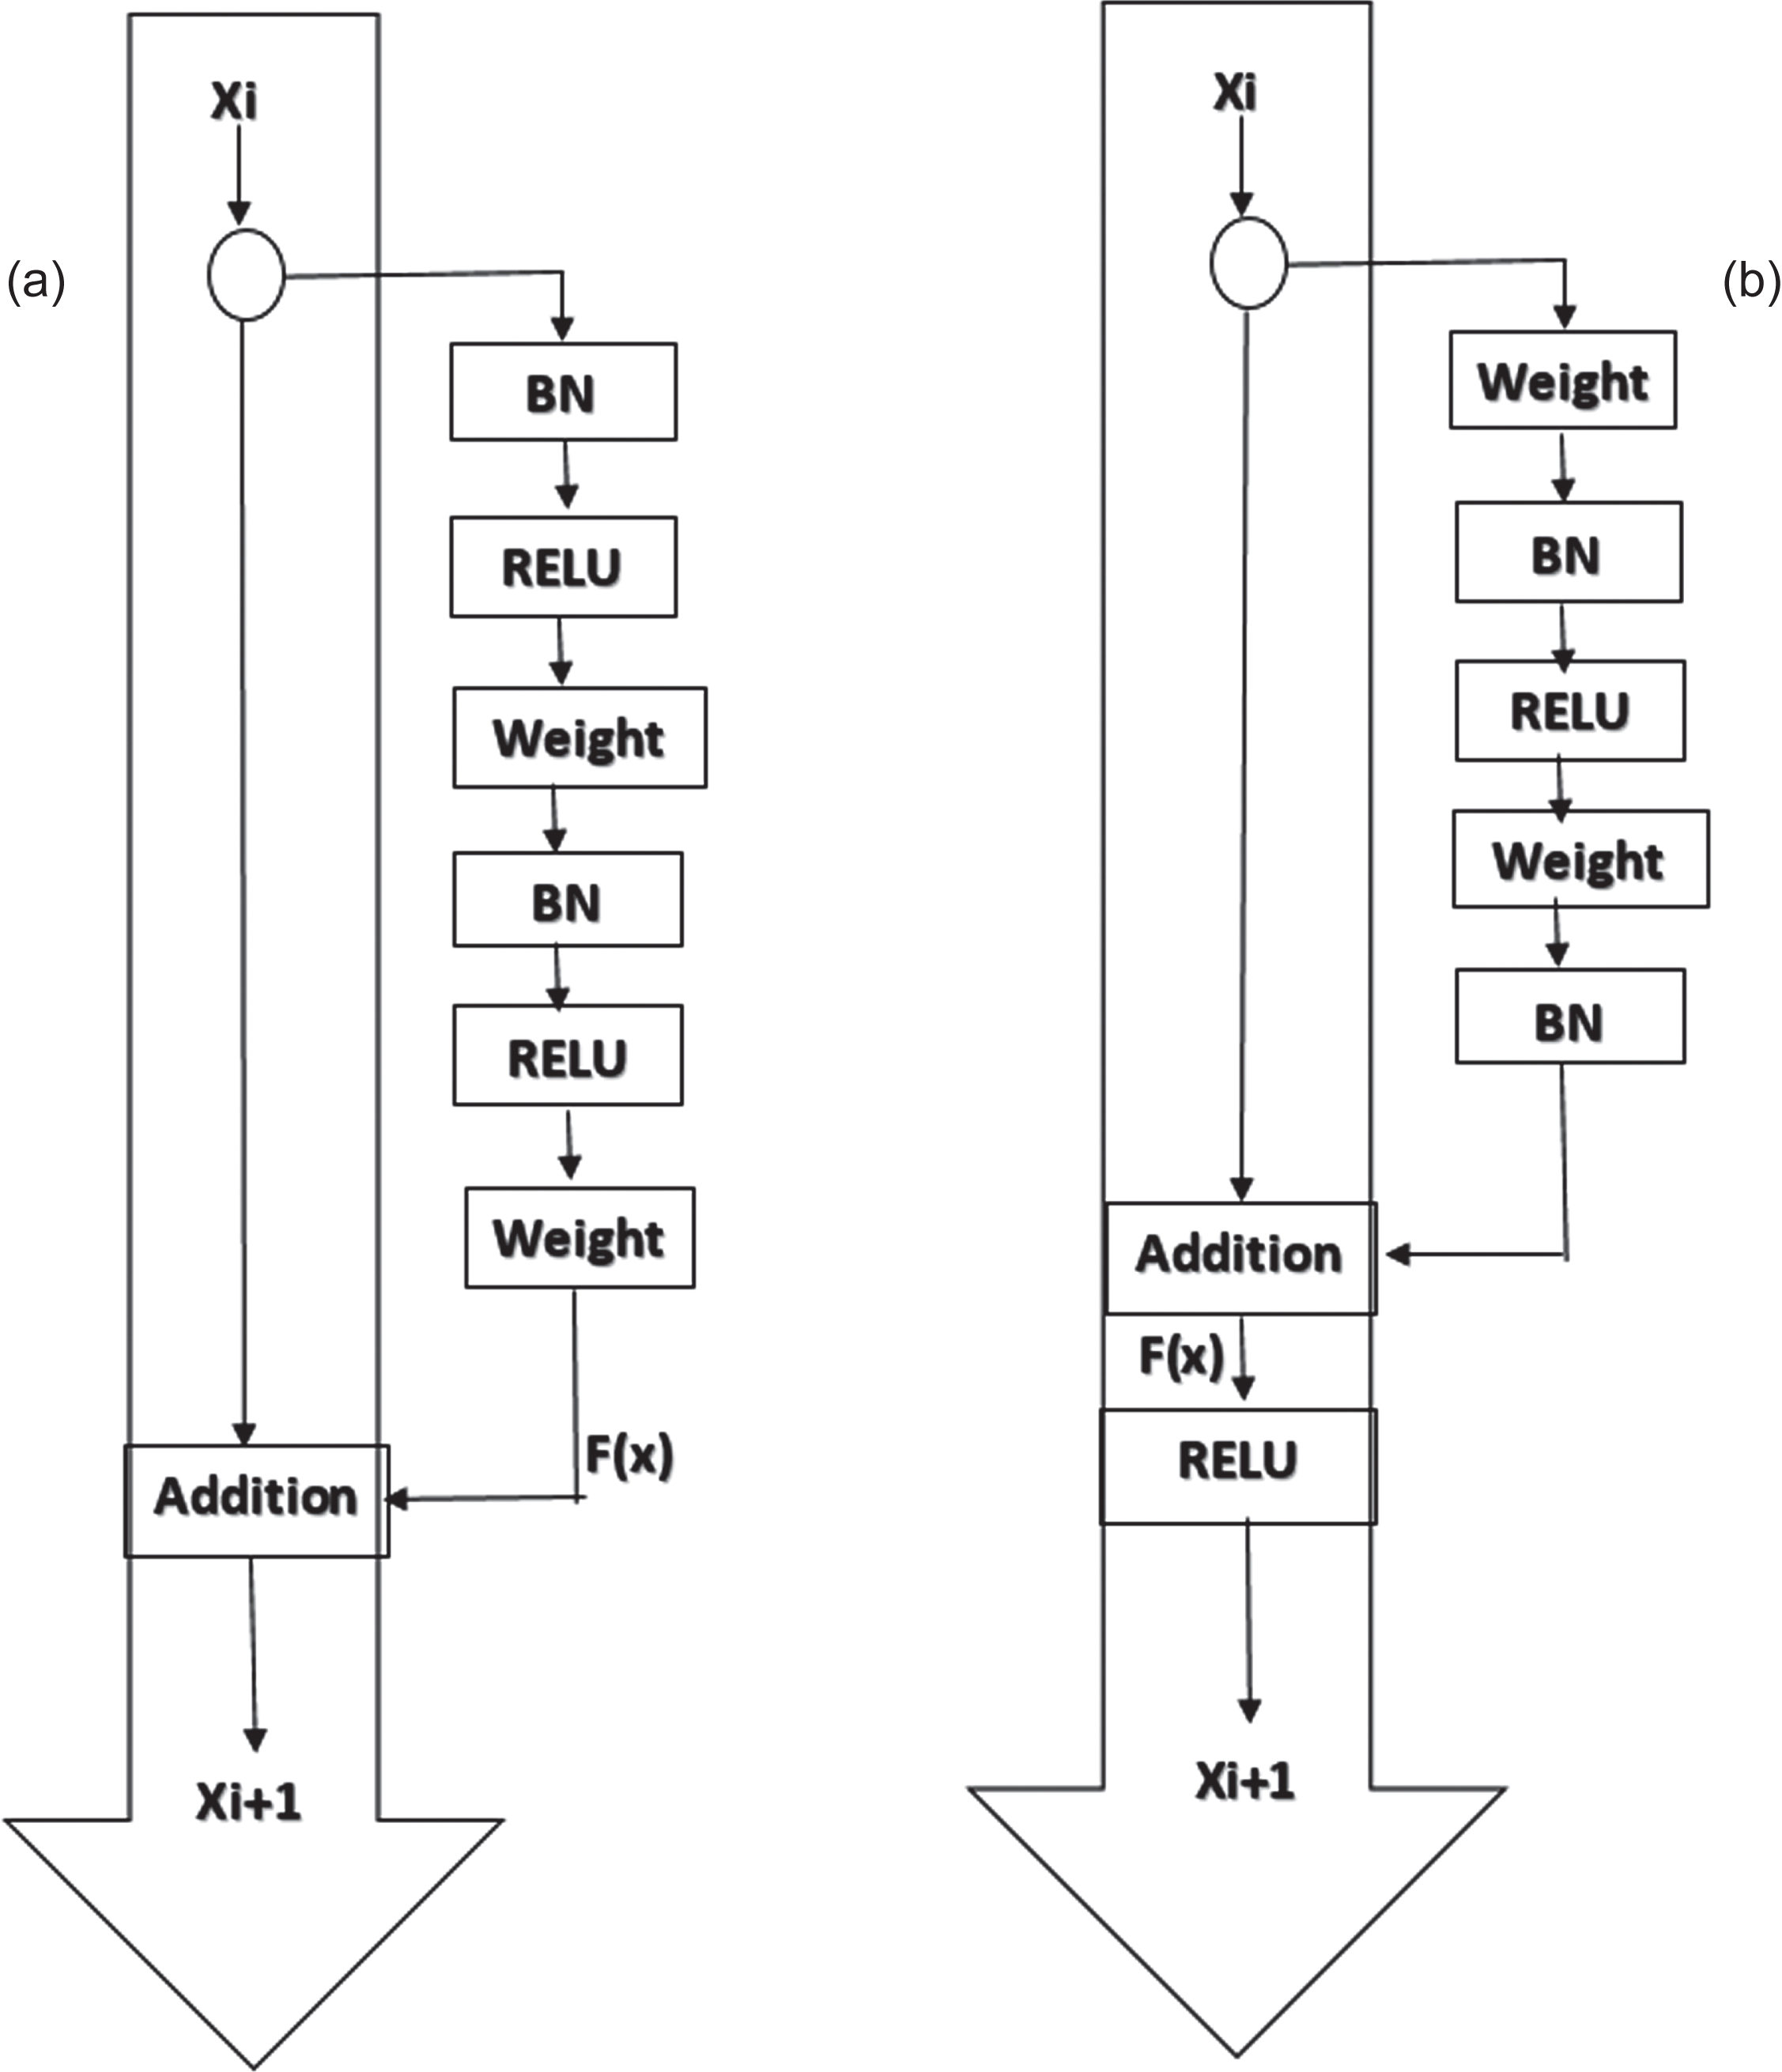 (a) Architecture of ResNet Version 1. (b) Architecture of ResNet Version 2. [25].